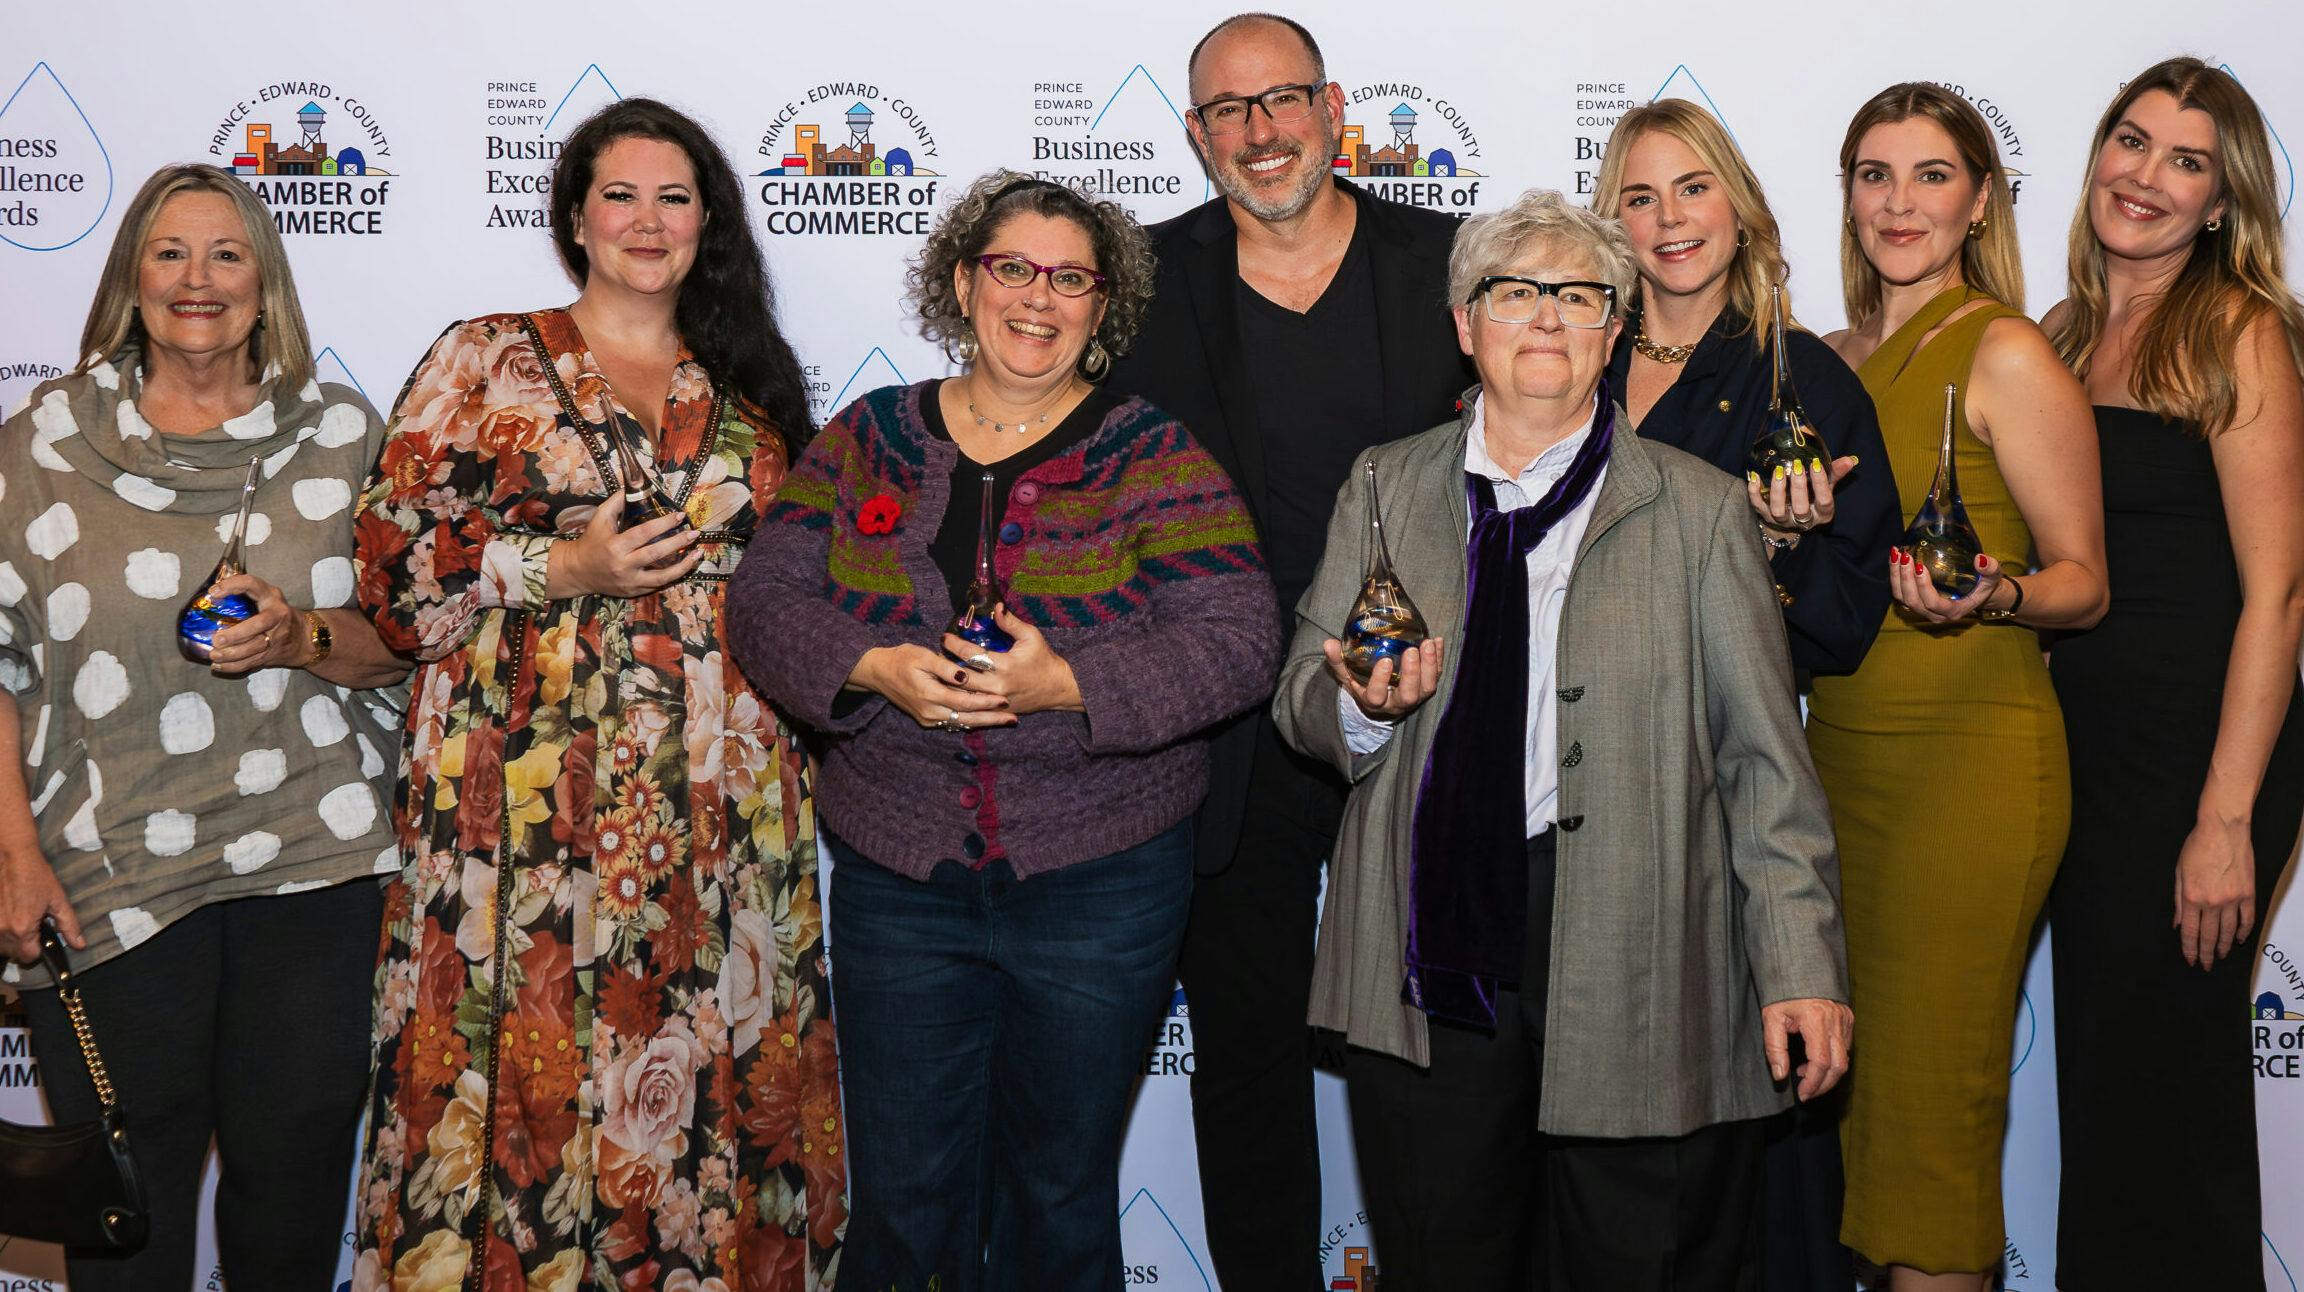 <p>THE WINNER&#8217;S CIRCLE: Business Excellence Award winners Jane Wollenberg, Lindsay McCallister, Lesley Snyder, Carson Arthur, Carlyn Moulton, Cana Charles, Emma Woodman and Annie Woodman gathered at the Cape Thursday to celebrate their success. (Onelook Productions)</p>
